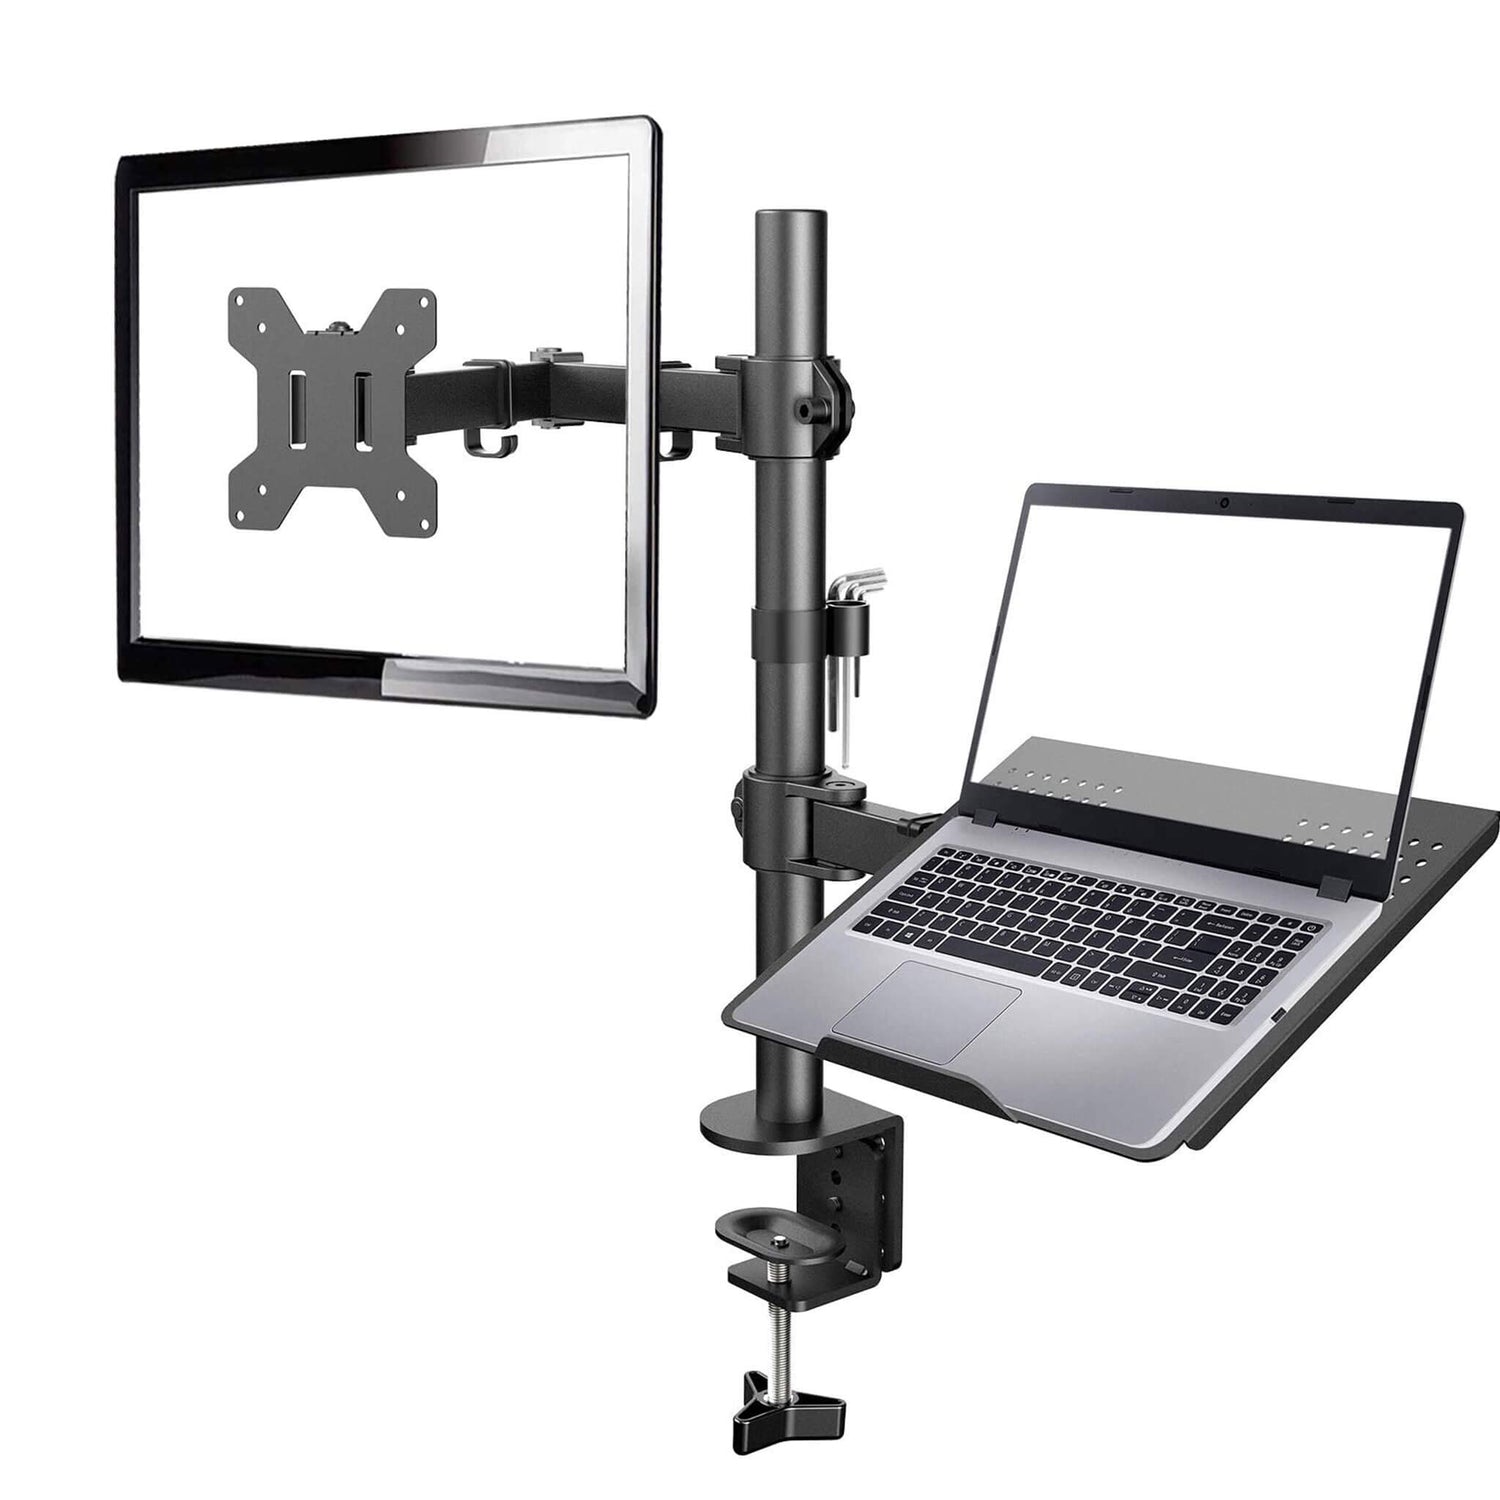 Desk Clamp Double Arm Monitor Mount for VESA 75x75 and 100x100